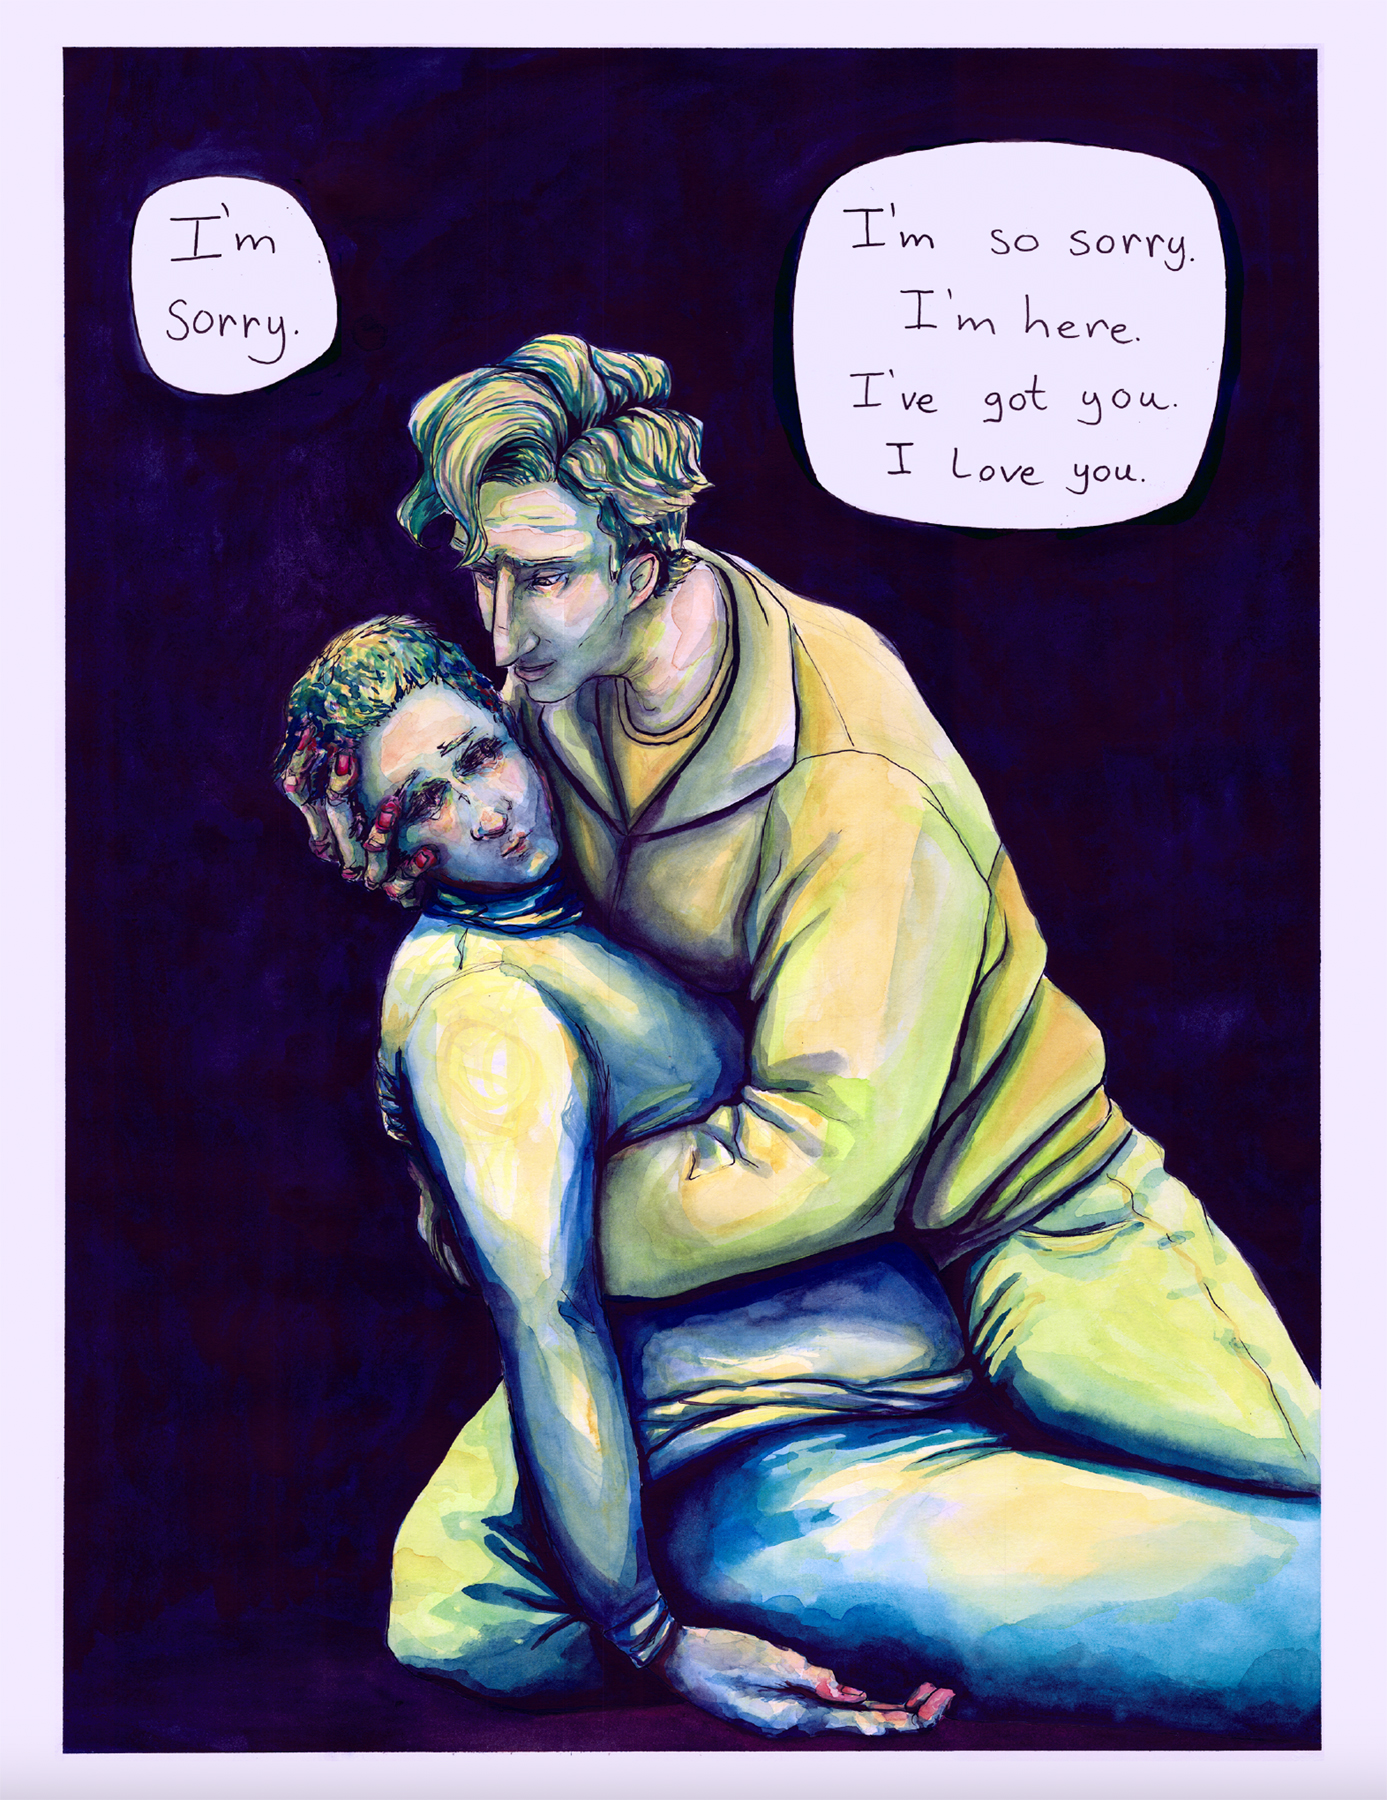 comic page from Against the Floor. Killian holds Crane and apologizes. Image courtesy of Daniell Stromanthe